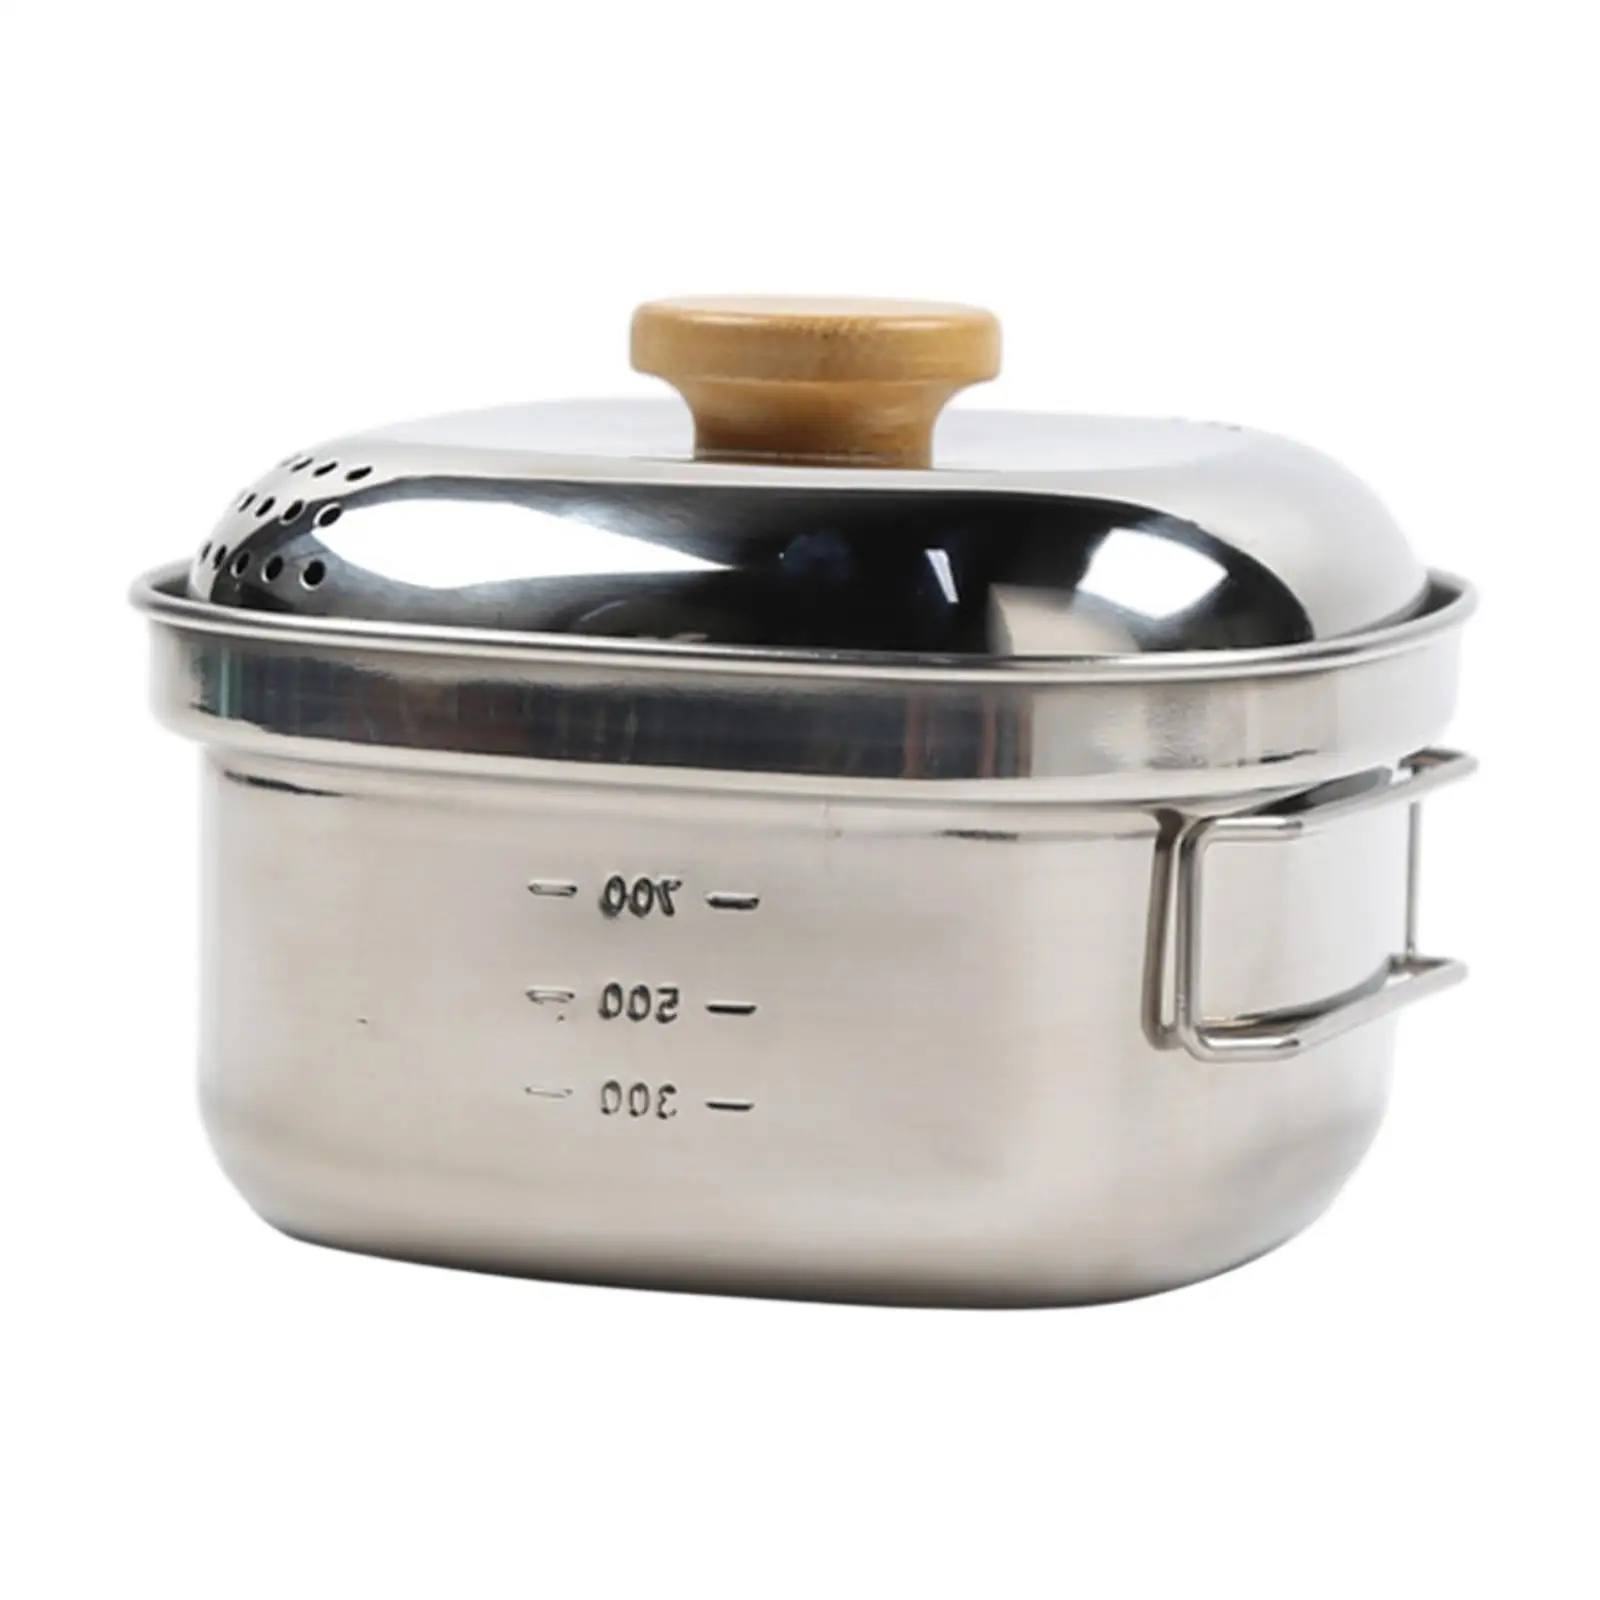 Camping Cookware Pot Multipurpose with Folding Handle Stainless Steel Cooking